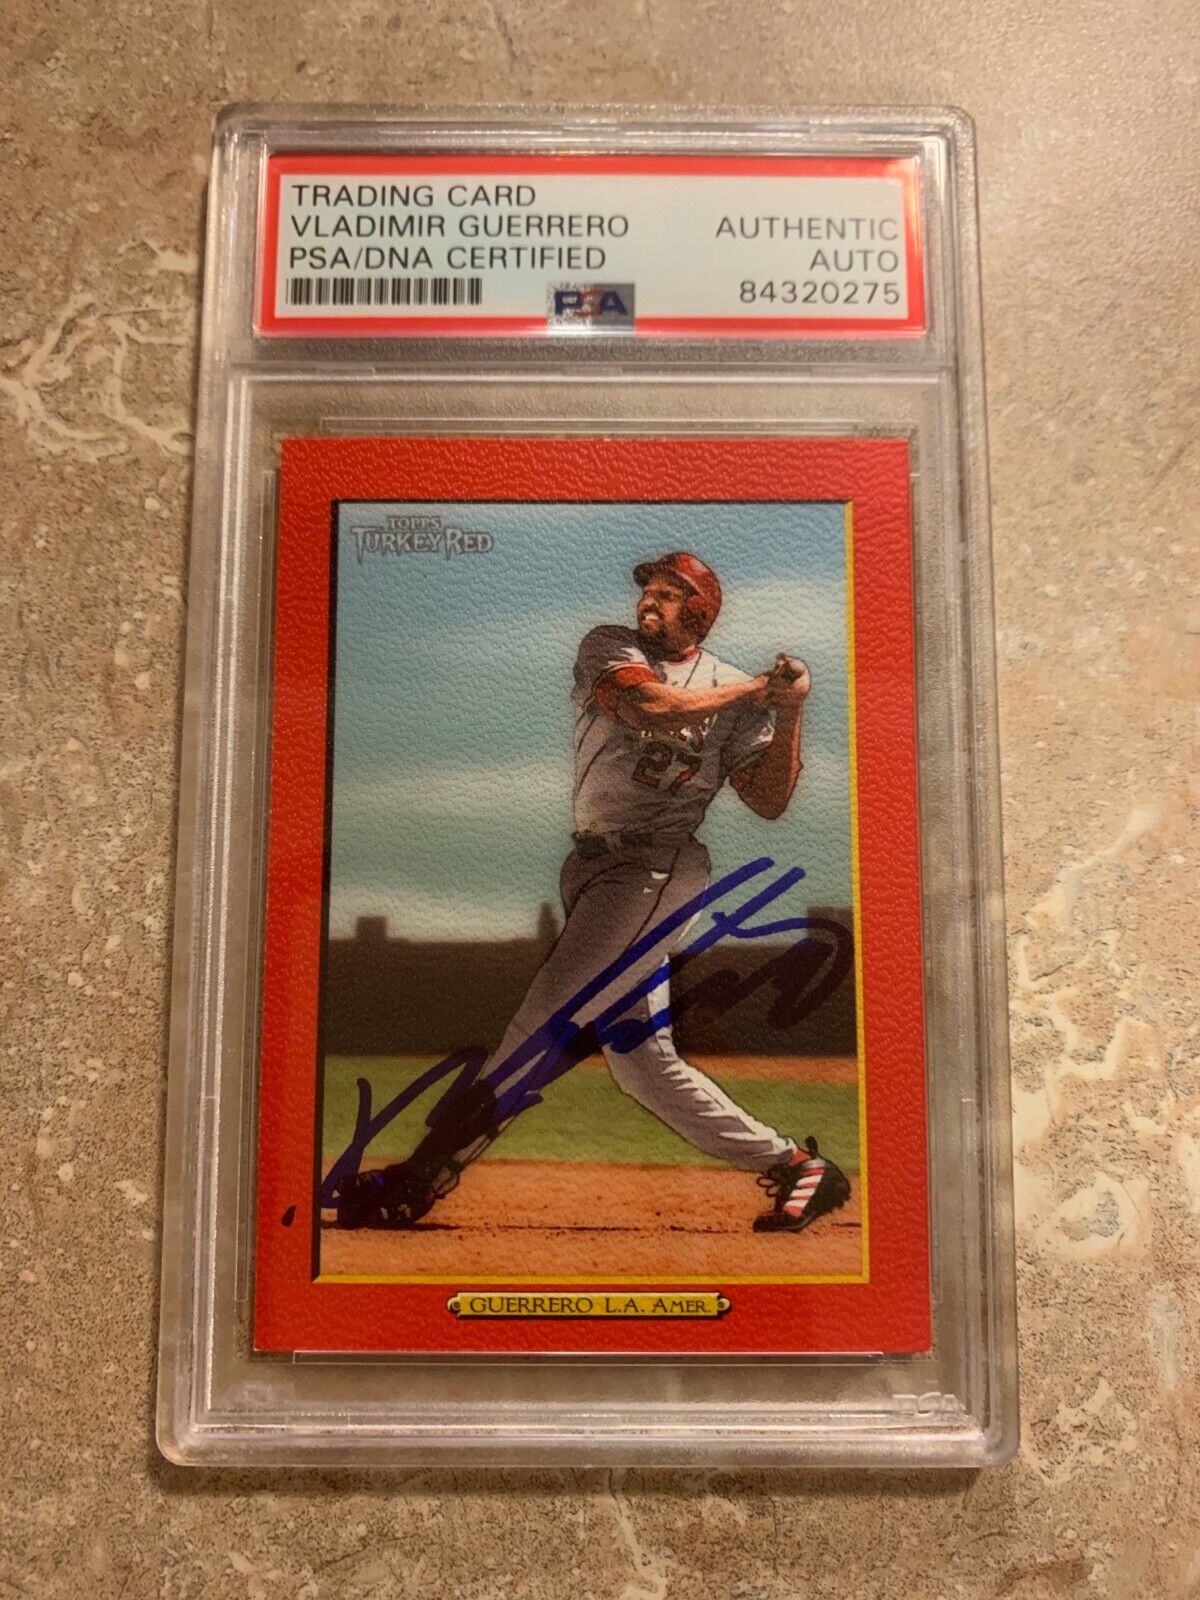 Vladimir Guerrero Autographed 2006 Topps Turkey Red Card 120 PSA Slabbed RED